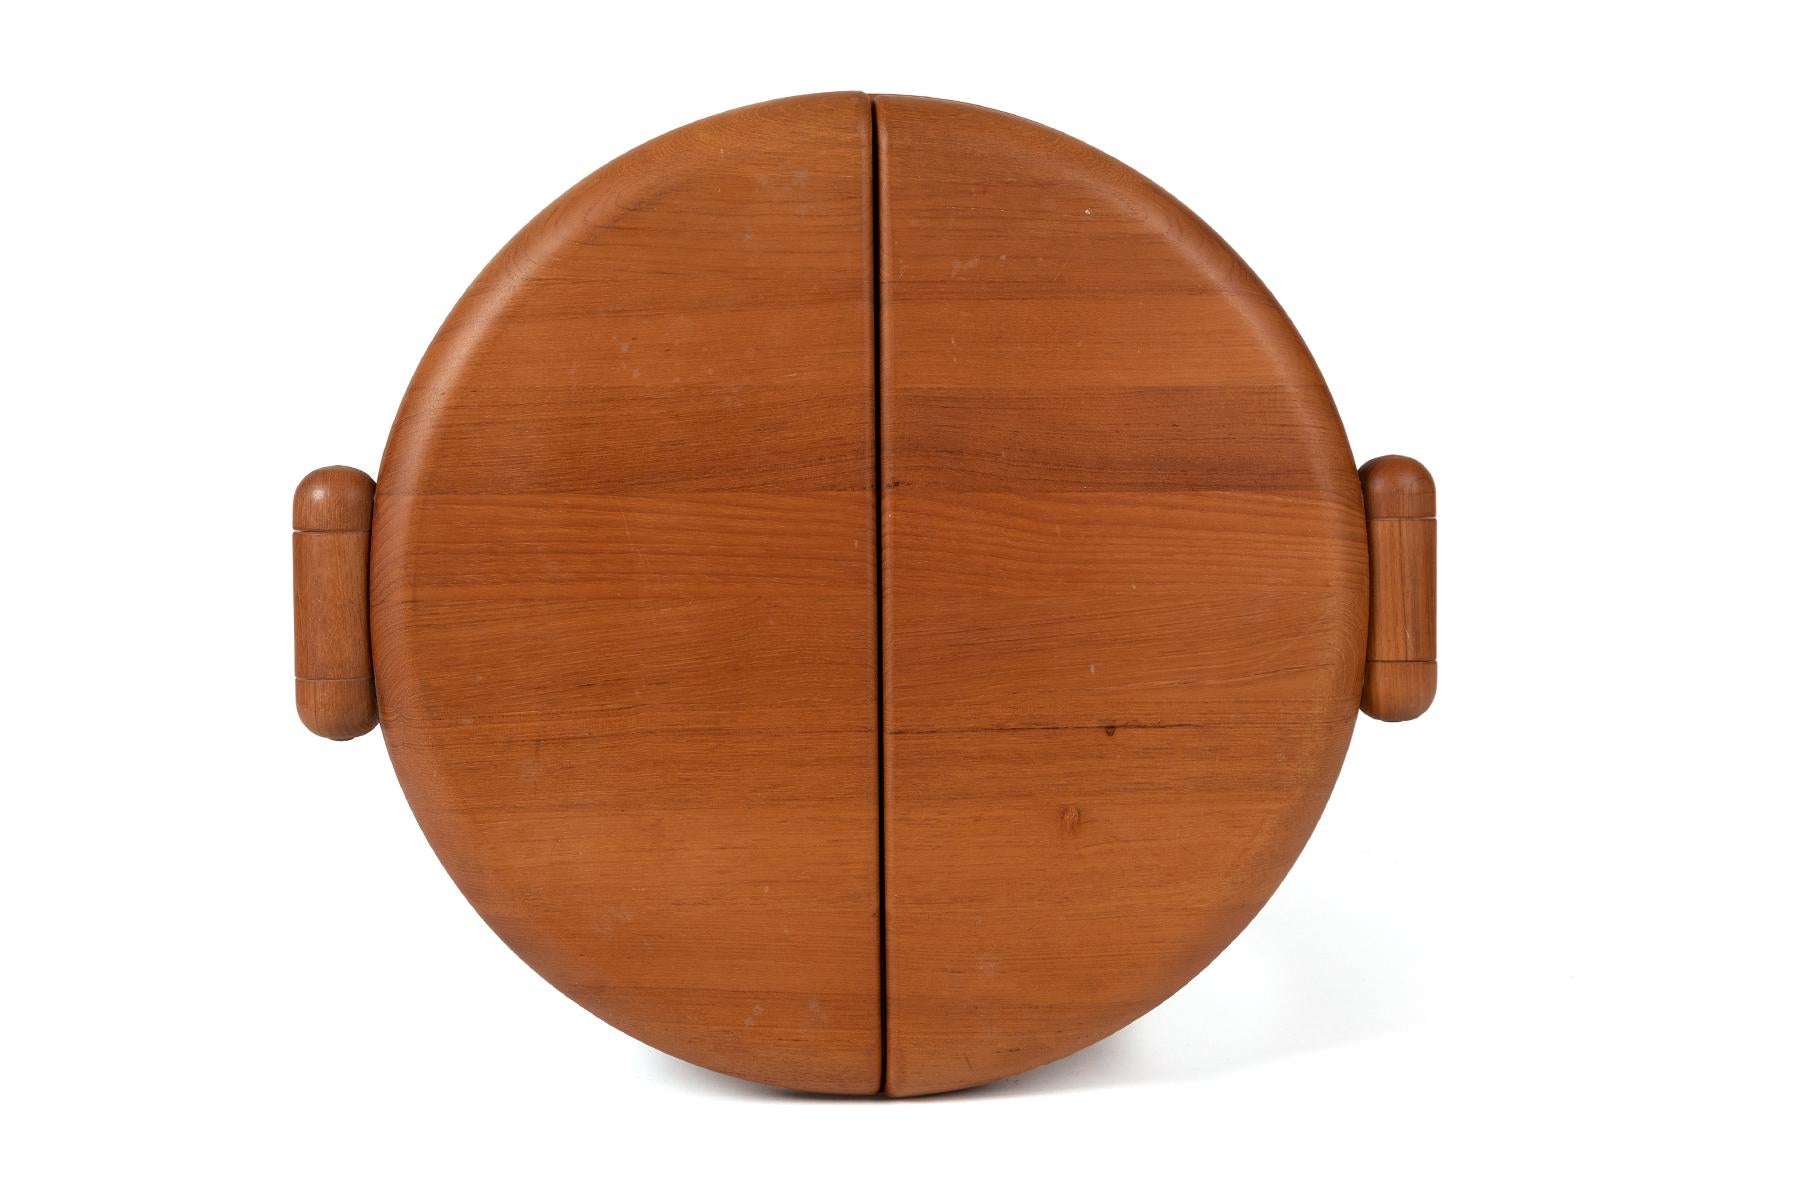 This unusual circular Danish teak table-top mirror has two half-moon sides that fold out to provide multiple angles. Can be wall mounted or used on a table top.